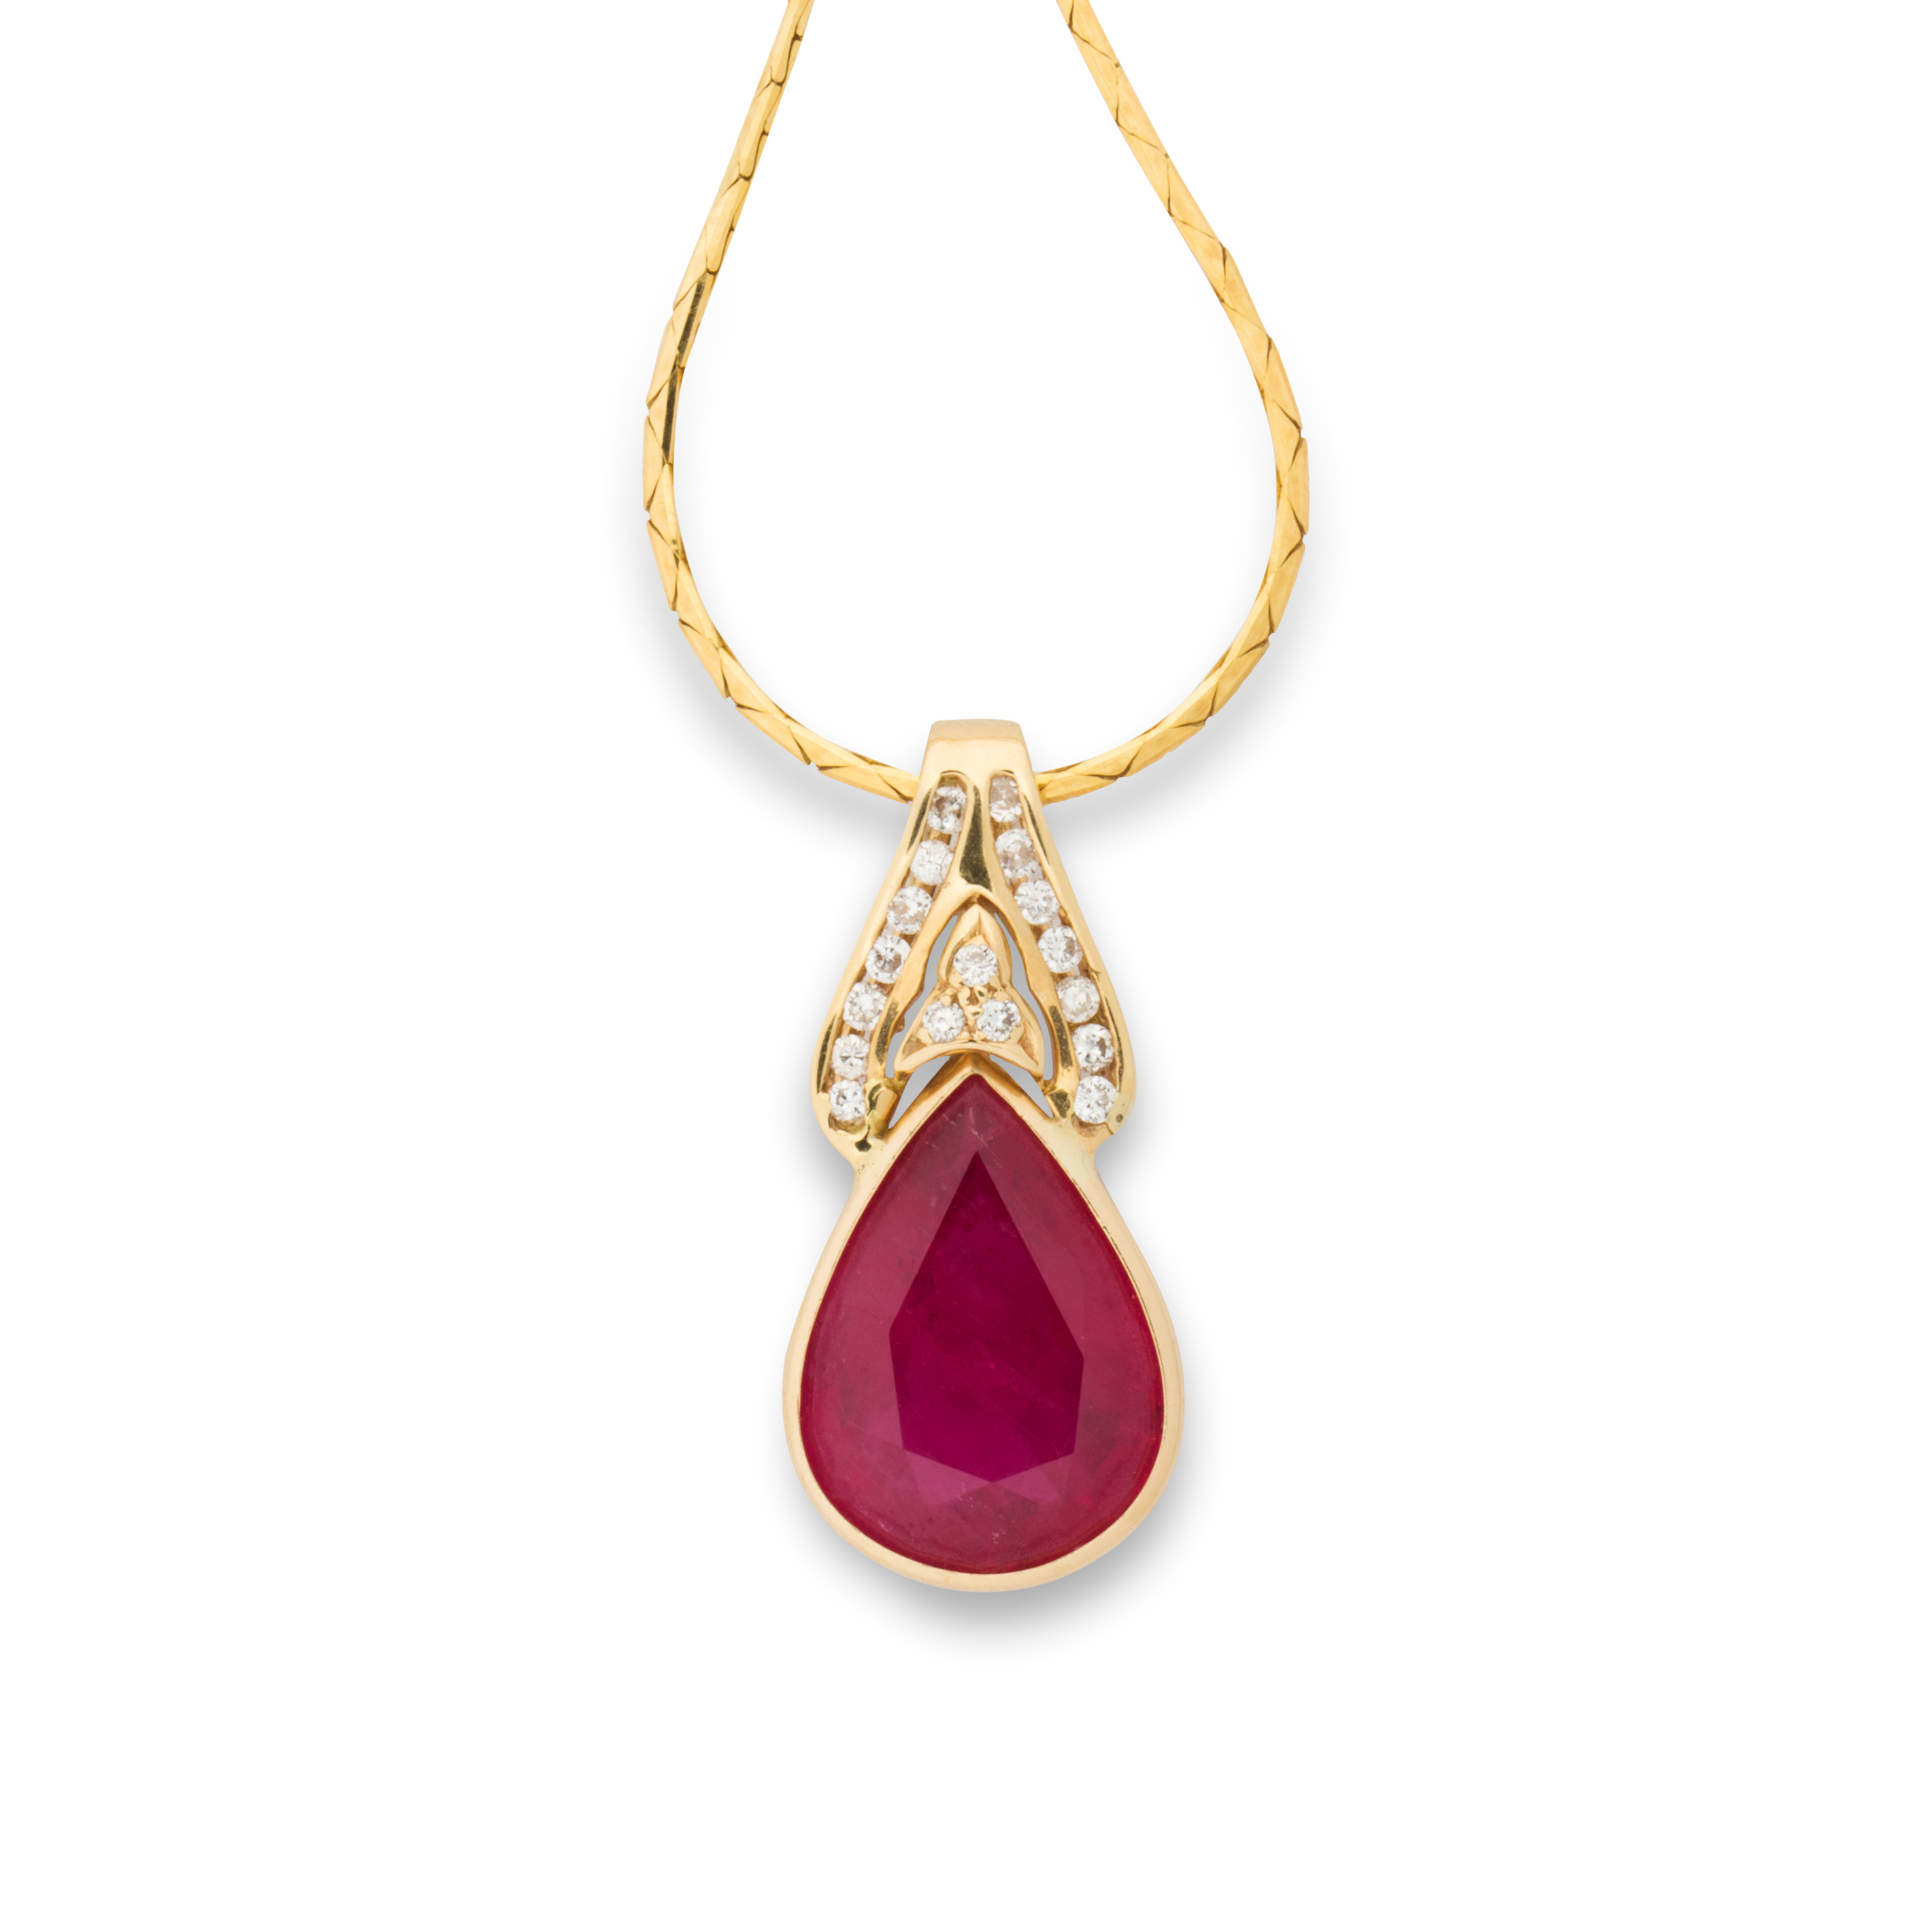 A RUBY, DIAMOND AND GOLD NECKLACE